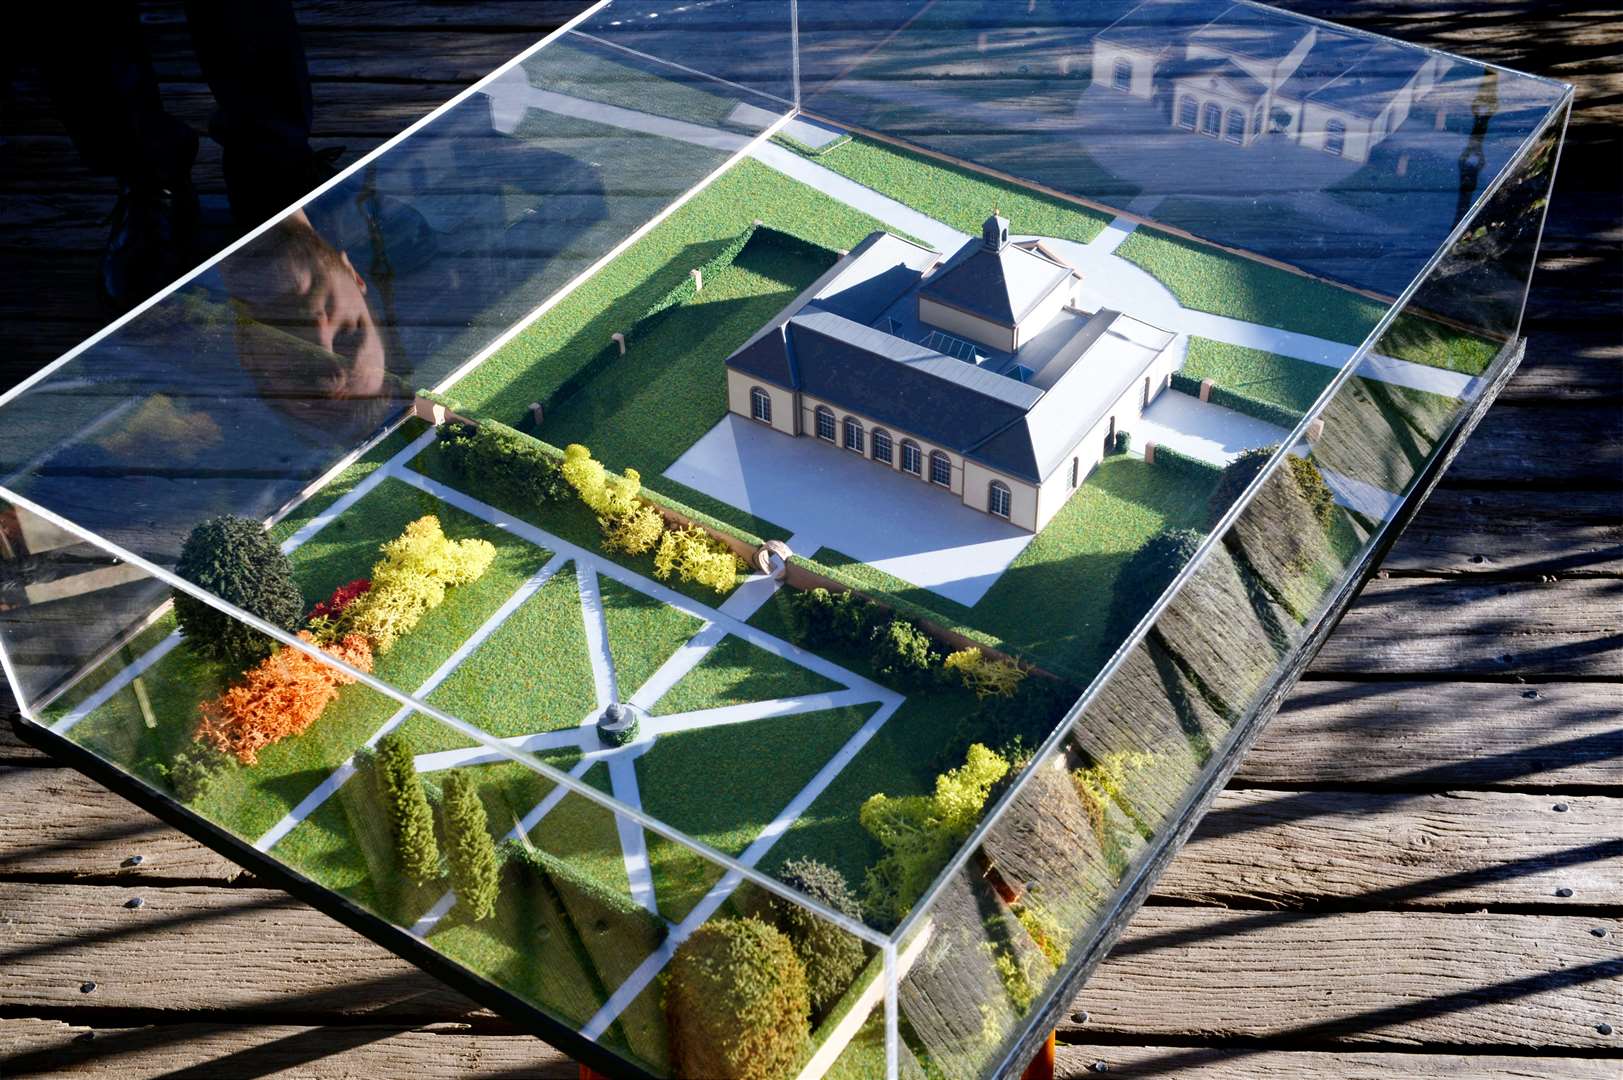 A scale model of the proposed events facility.